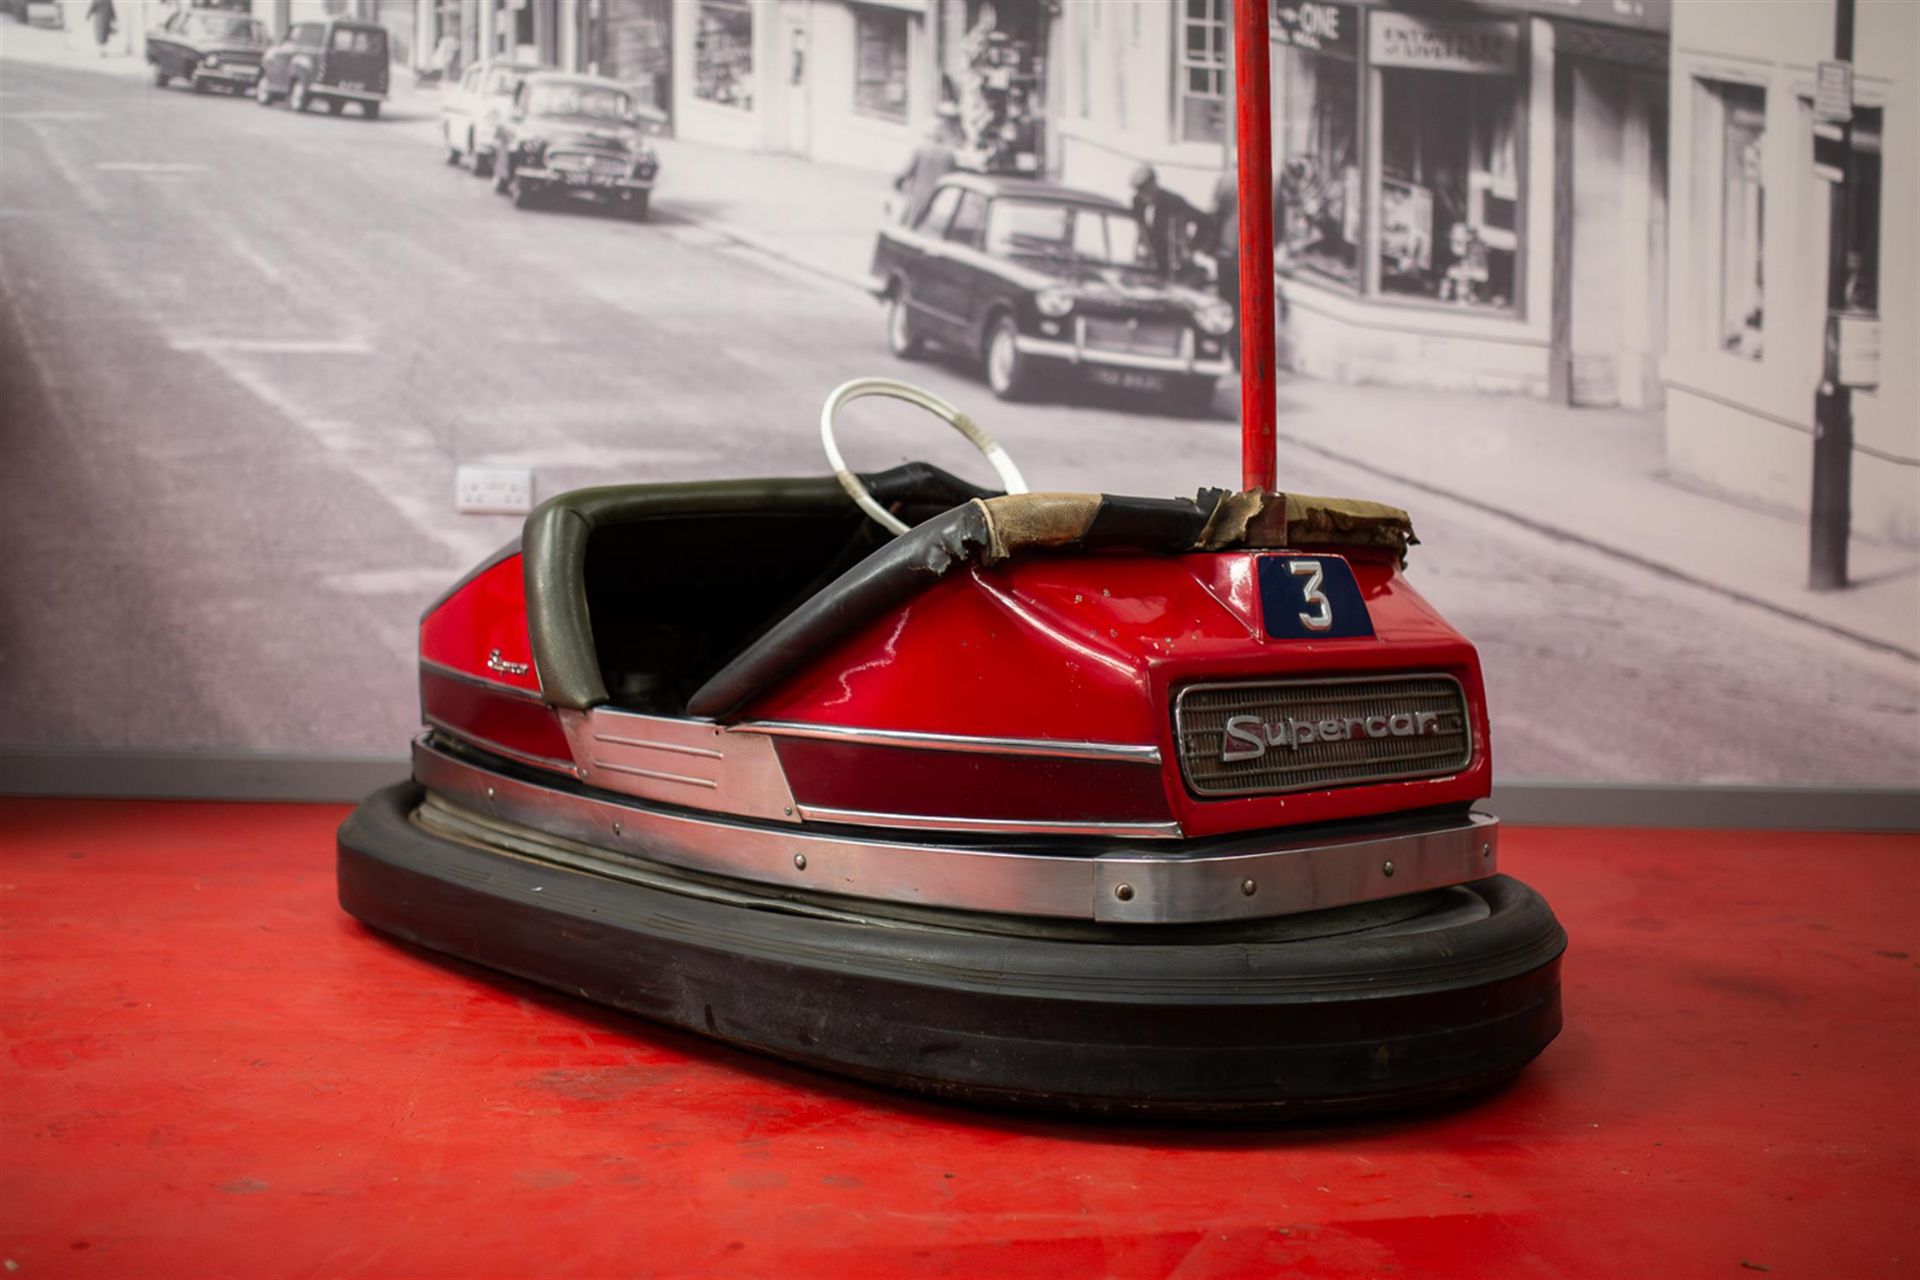 Supercar Dodgem c.Early 1960s - Image 4 of 10